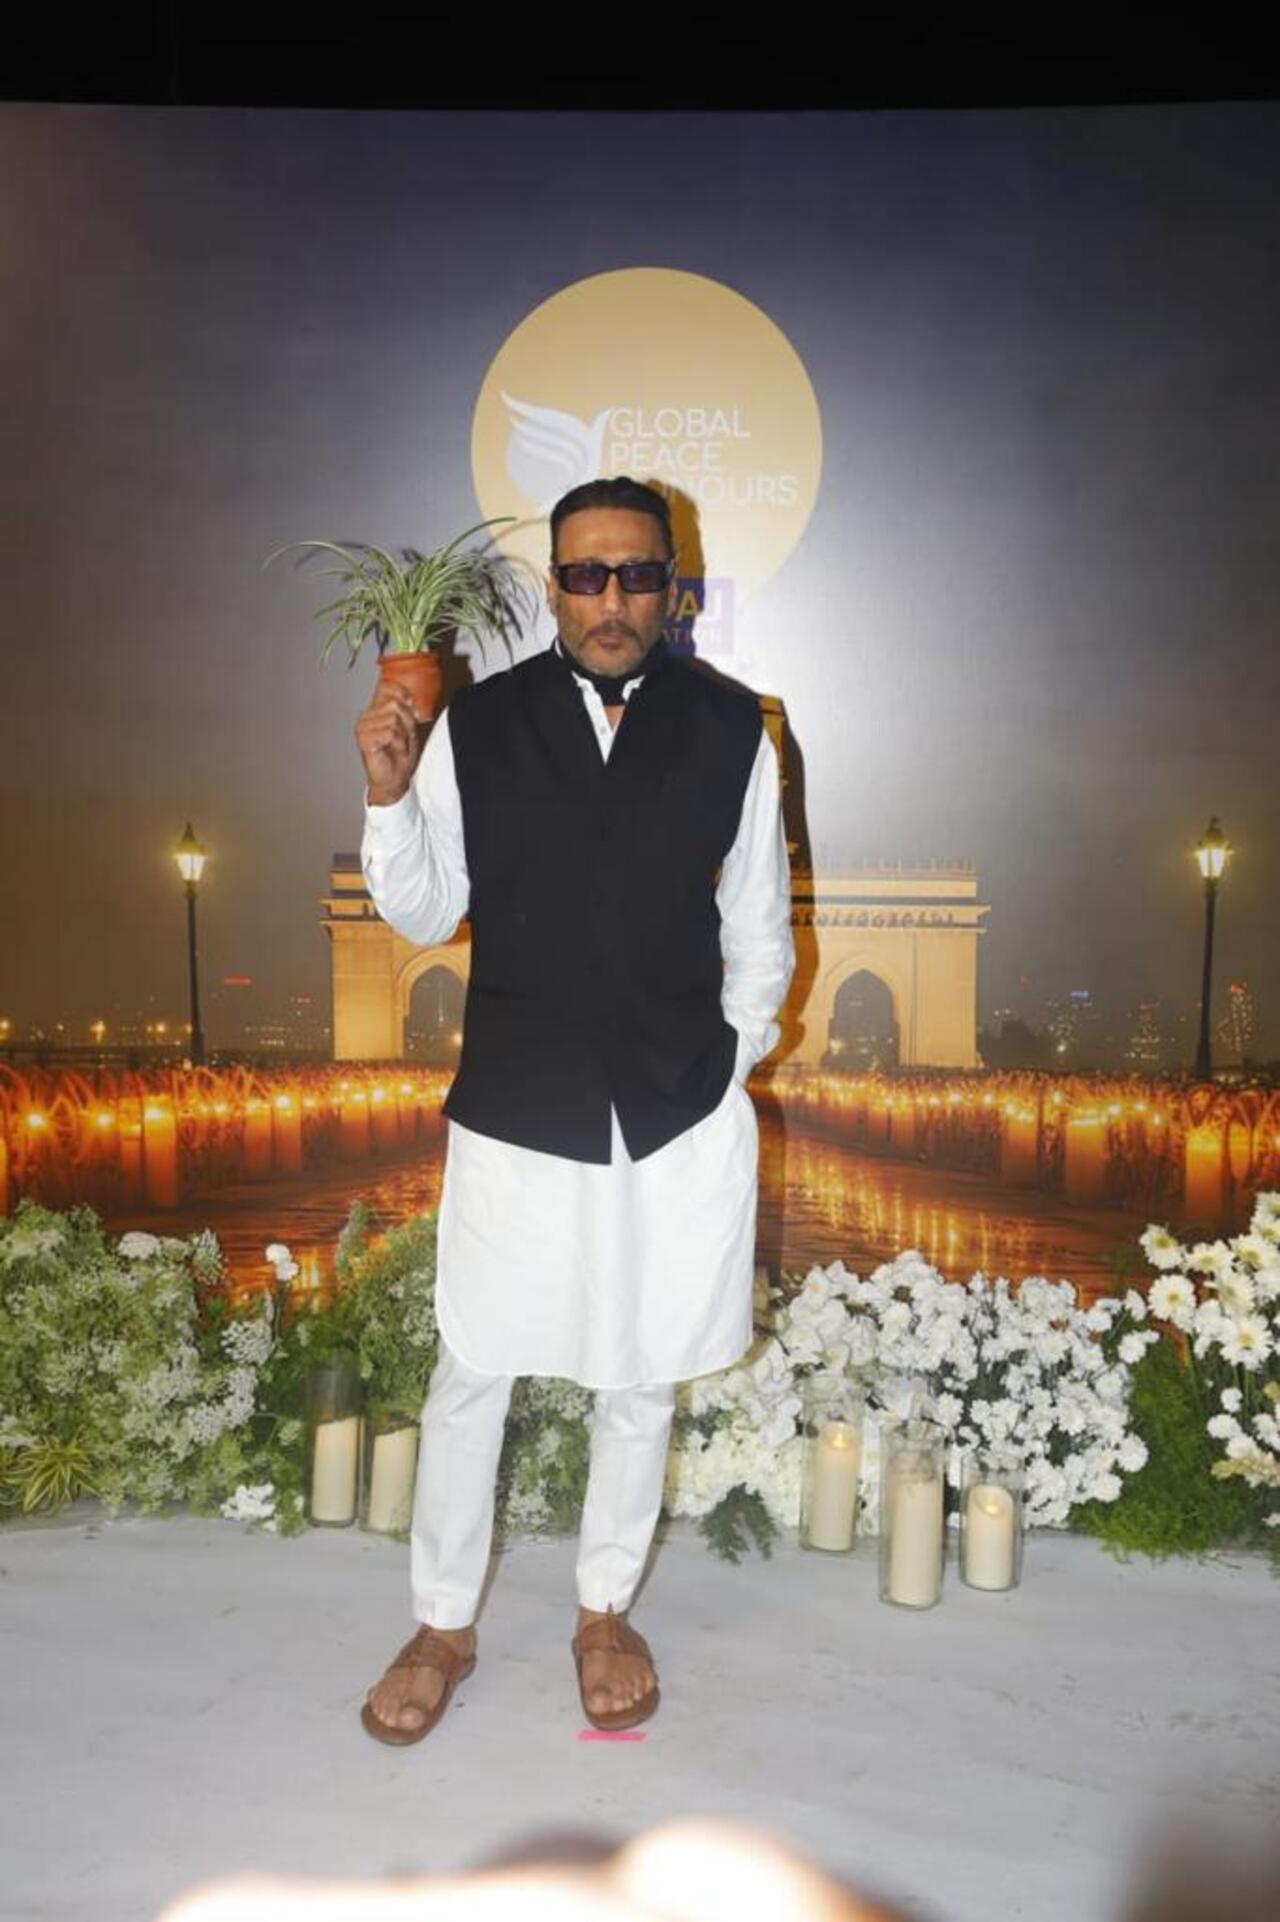 Jackie Shroff arrived with a sapling for the event